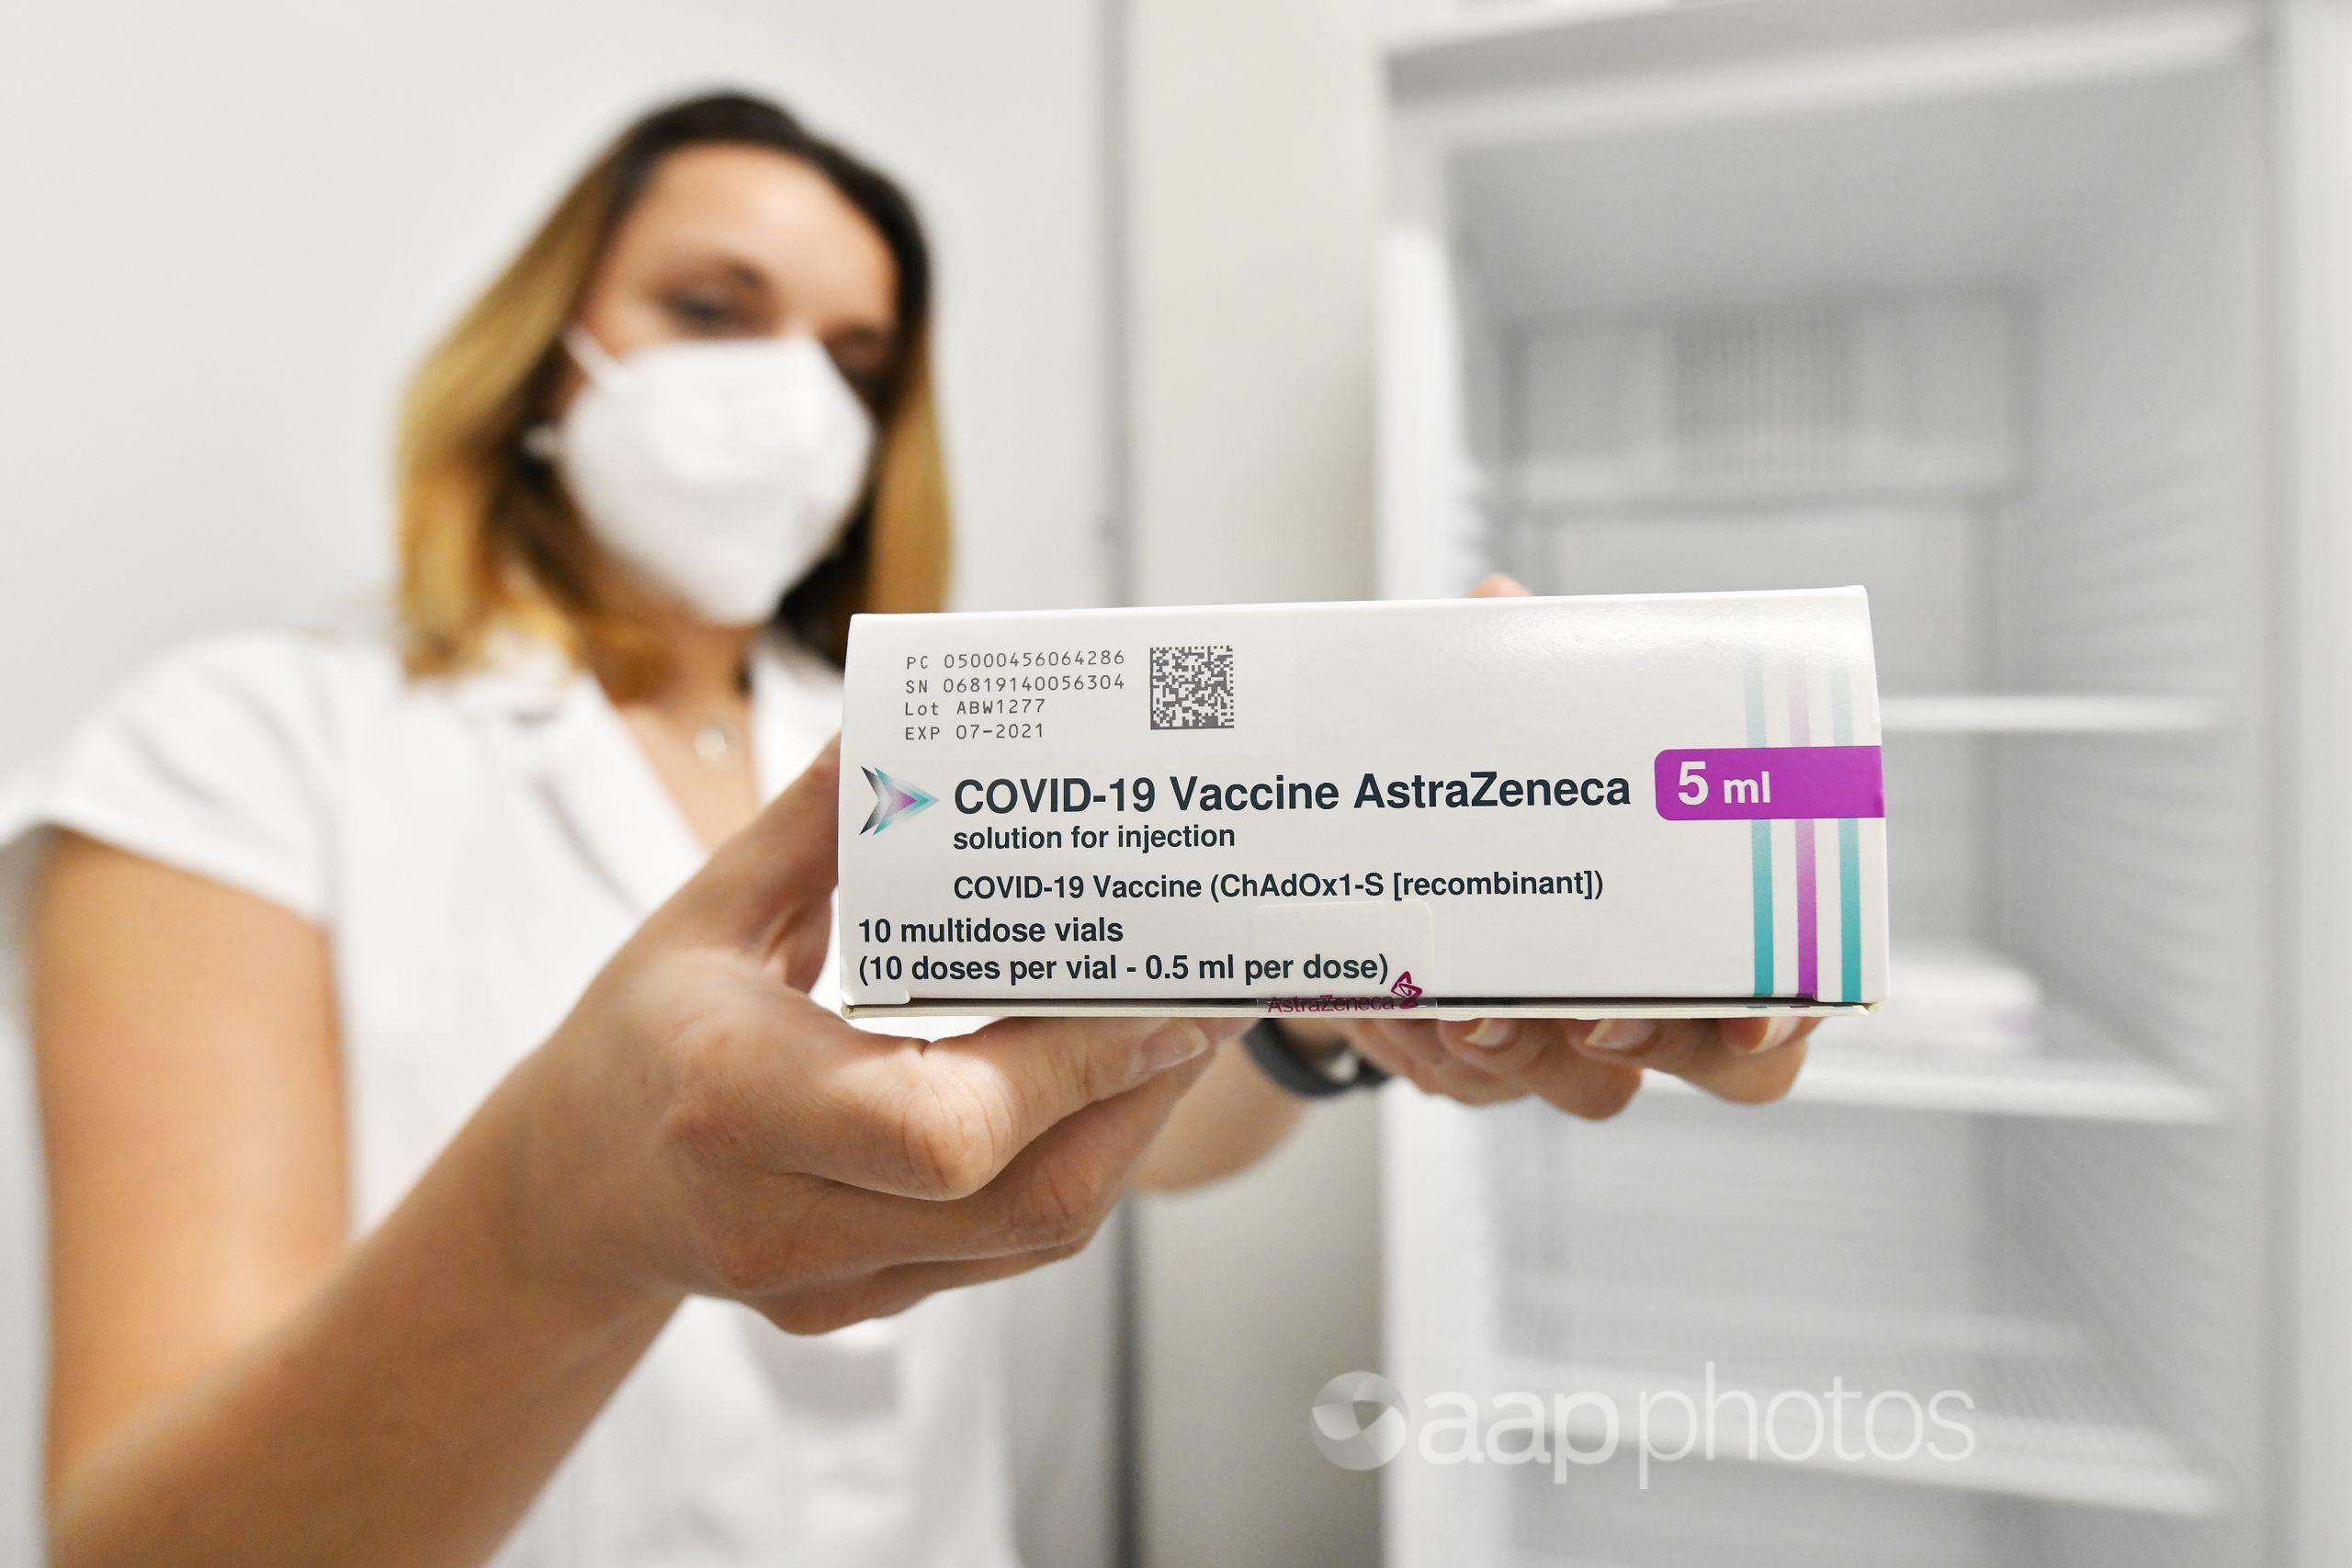 A package of COVID-19 vaccine AstraZeneca.